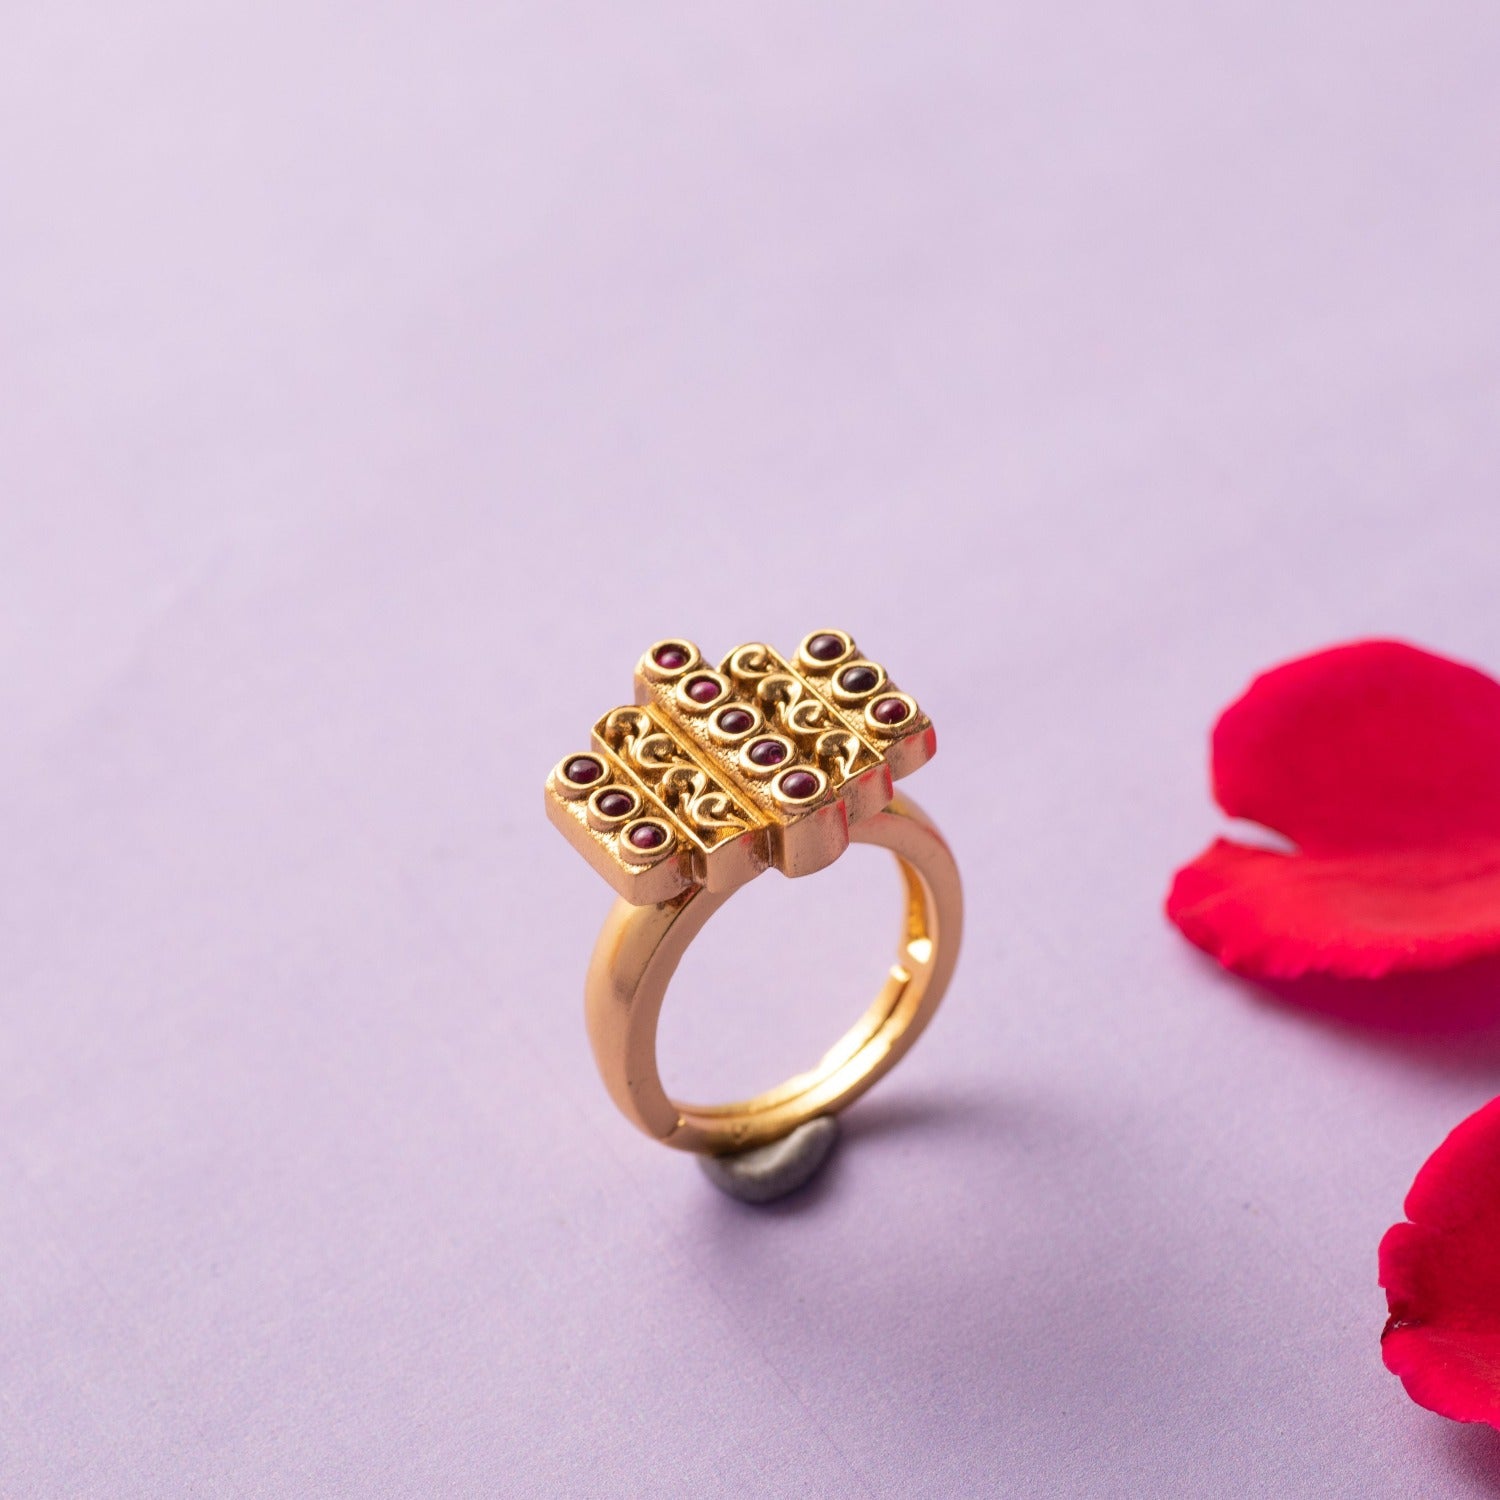 Buy Unique Pattern Gold Ring At Best Price | Karuri Jewellers